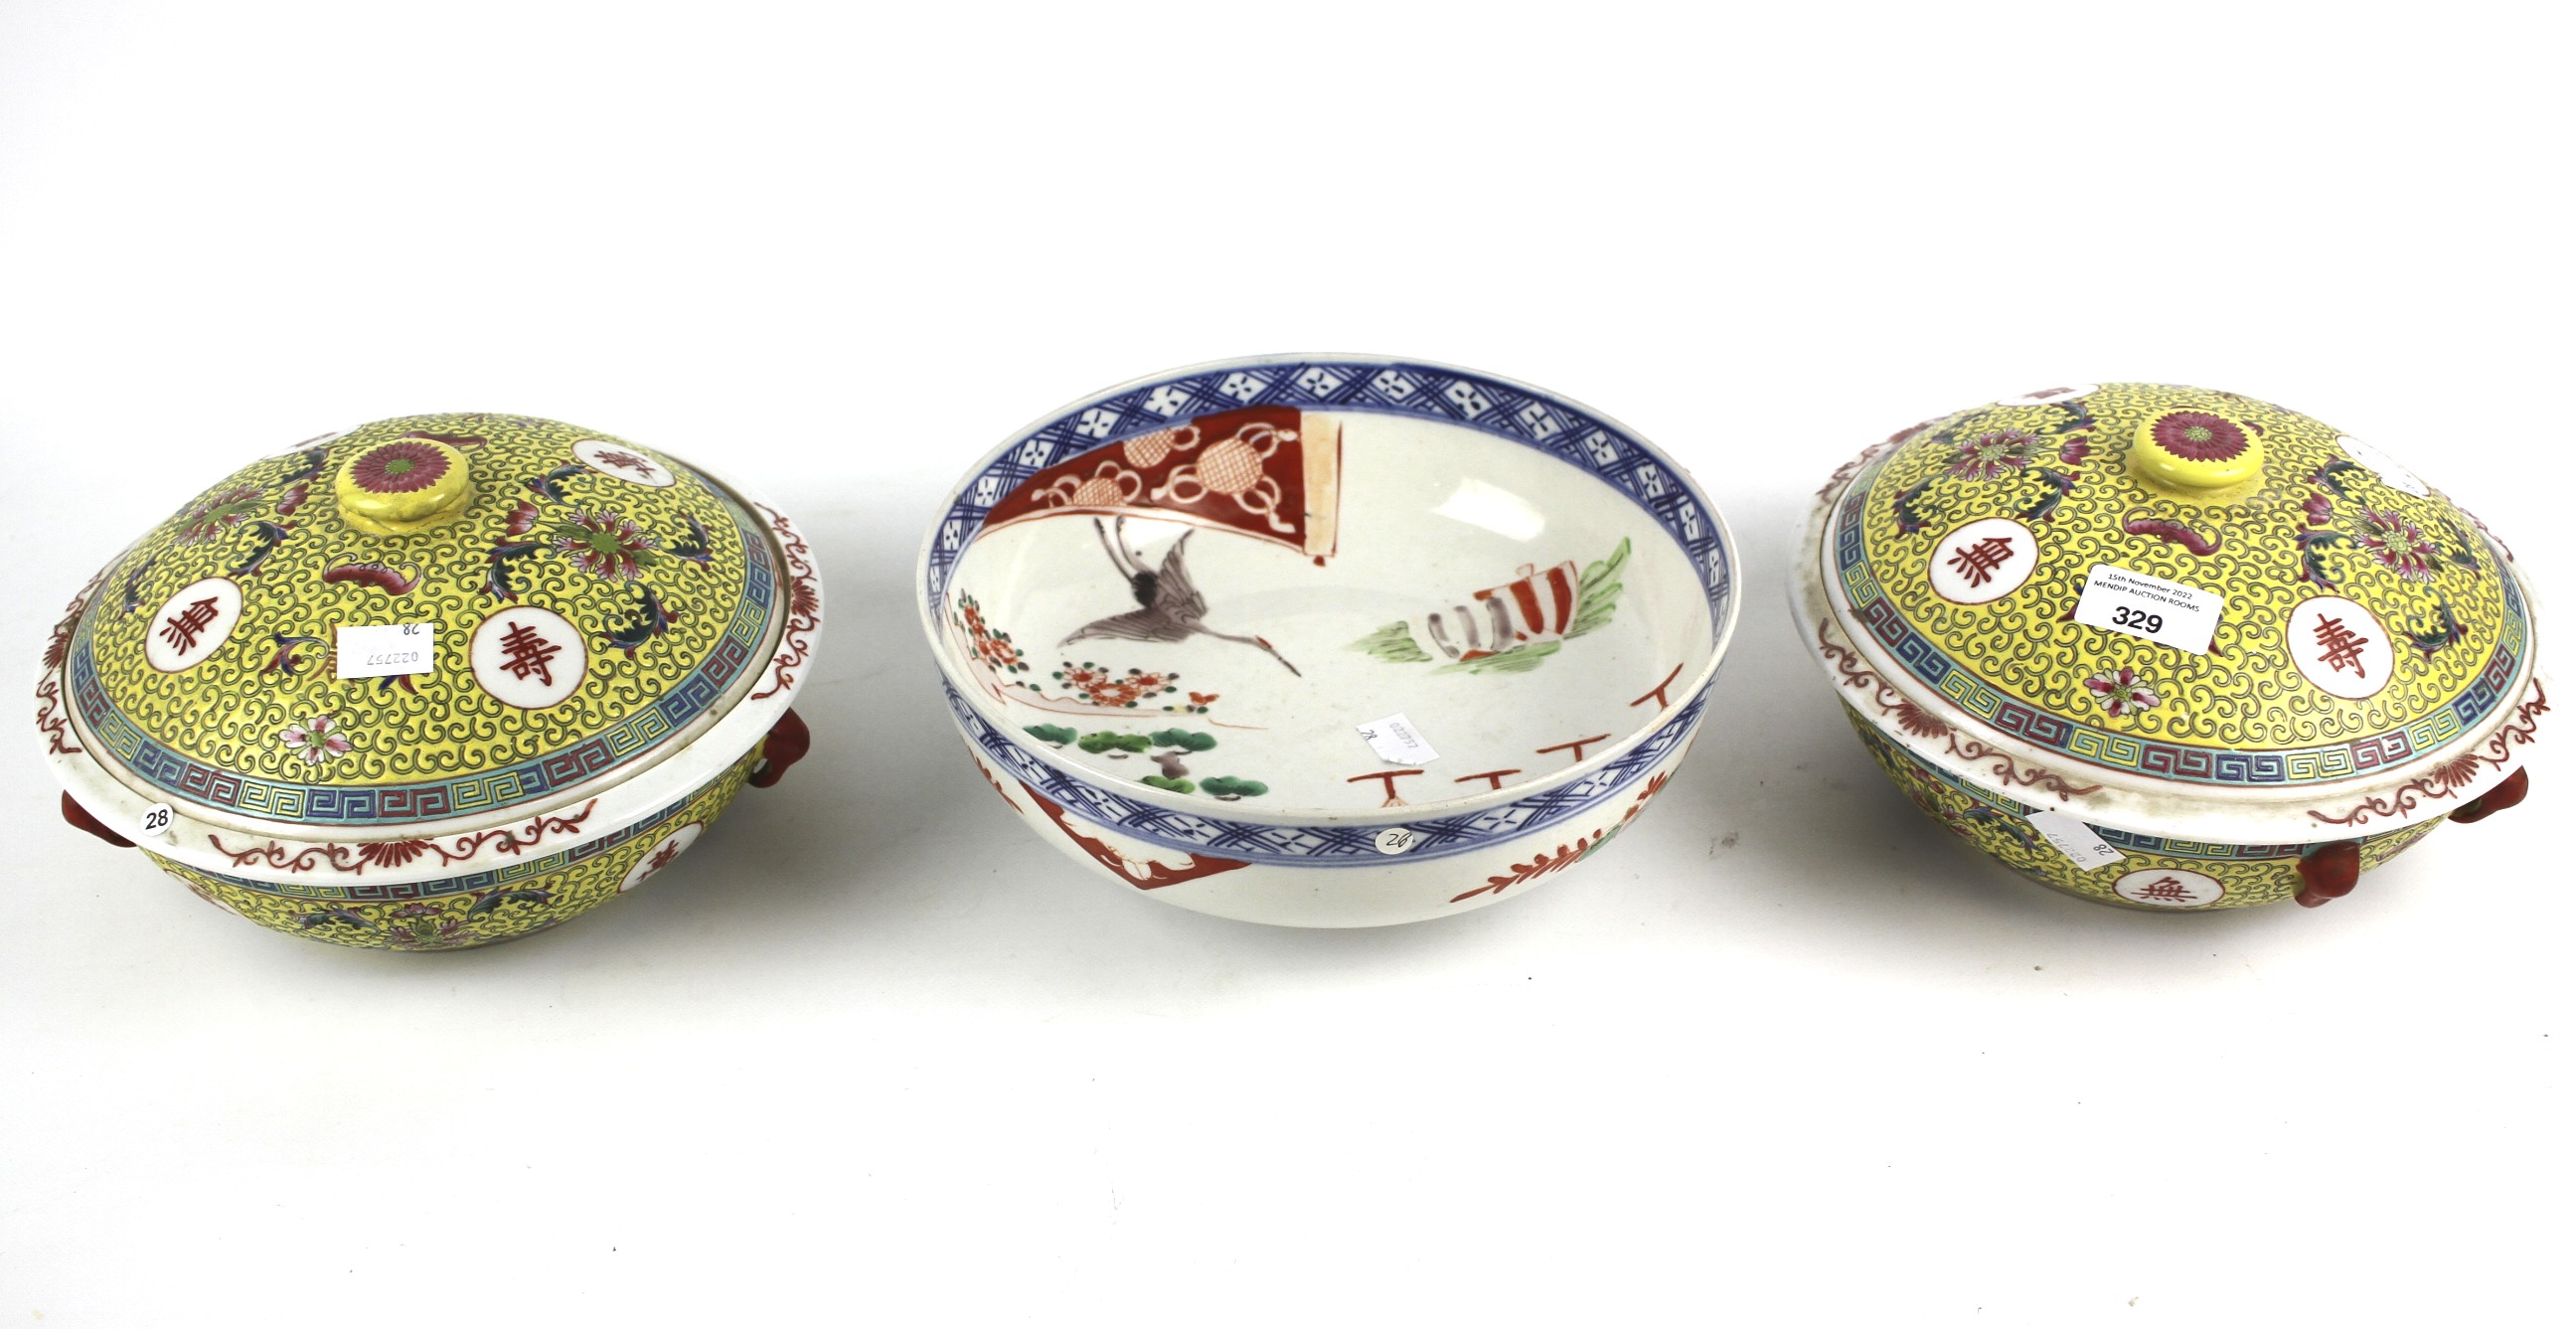 Pair of 20th century Chinese porcelain circular bowls and covers and a Japanese bowl.